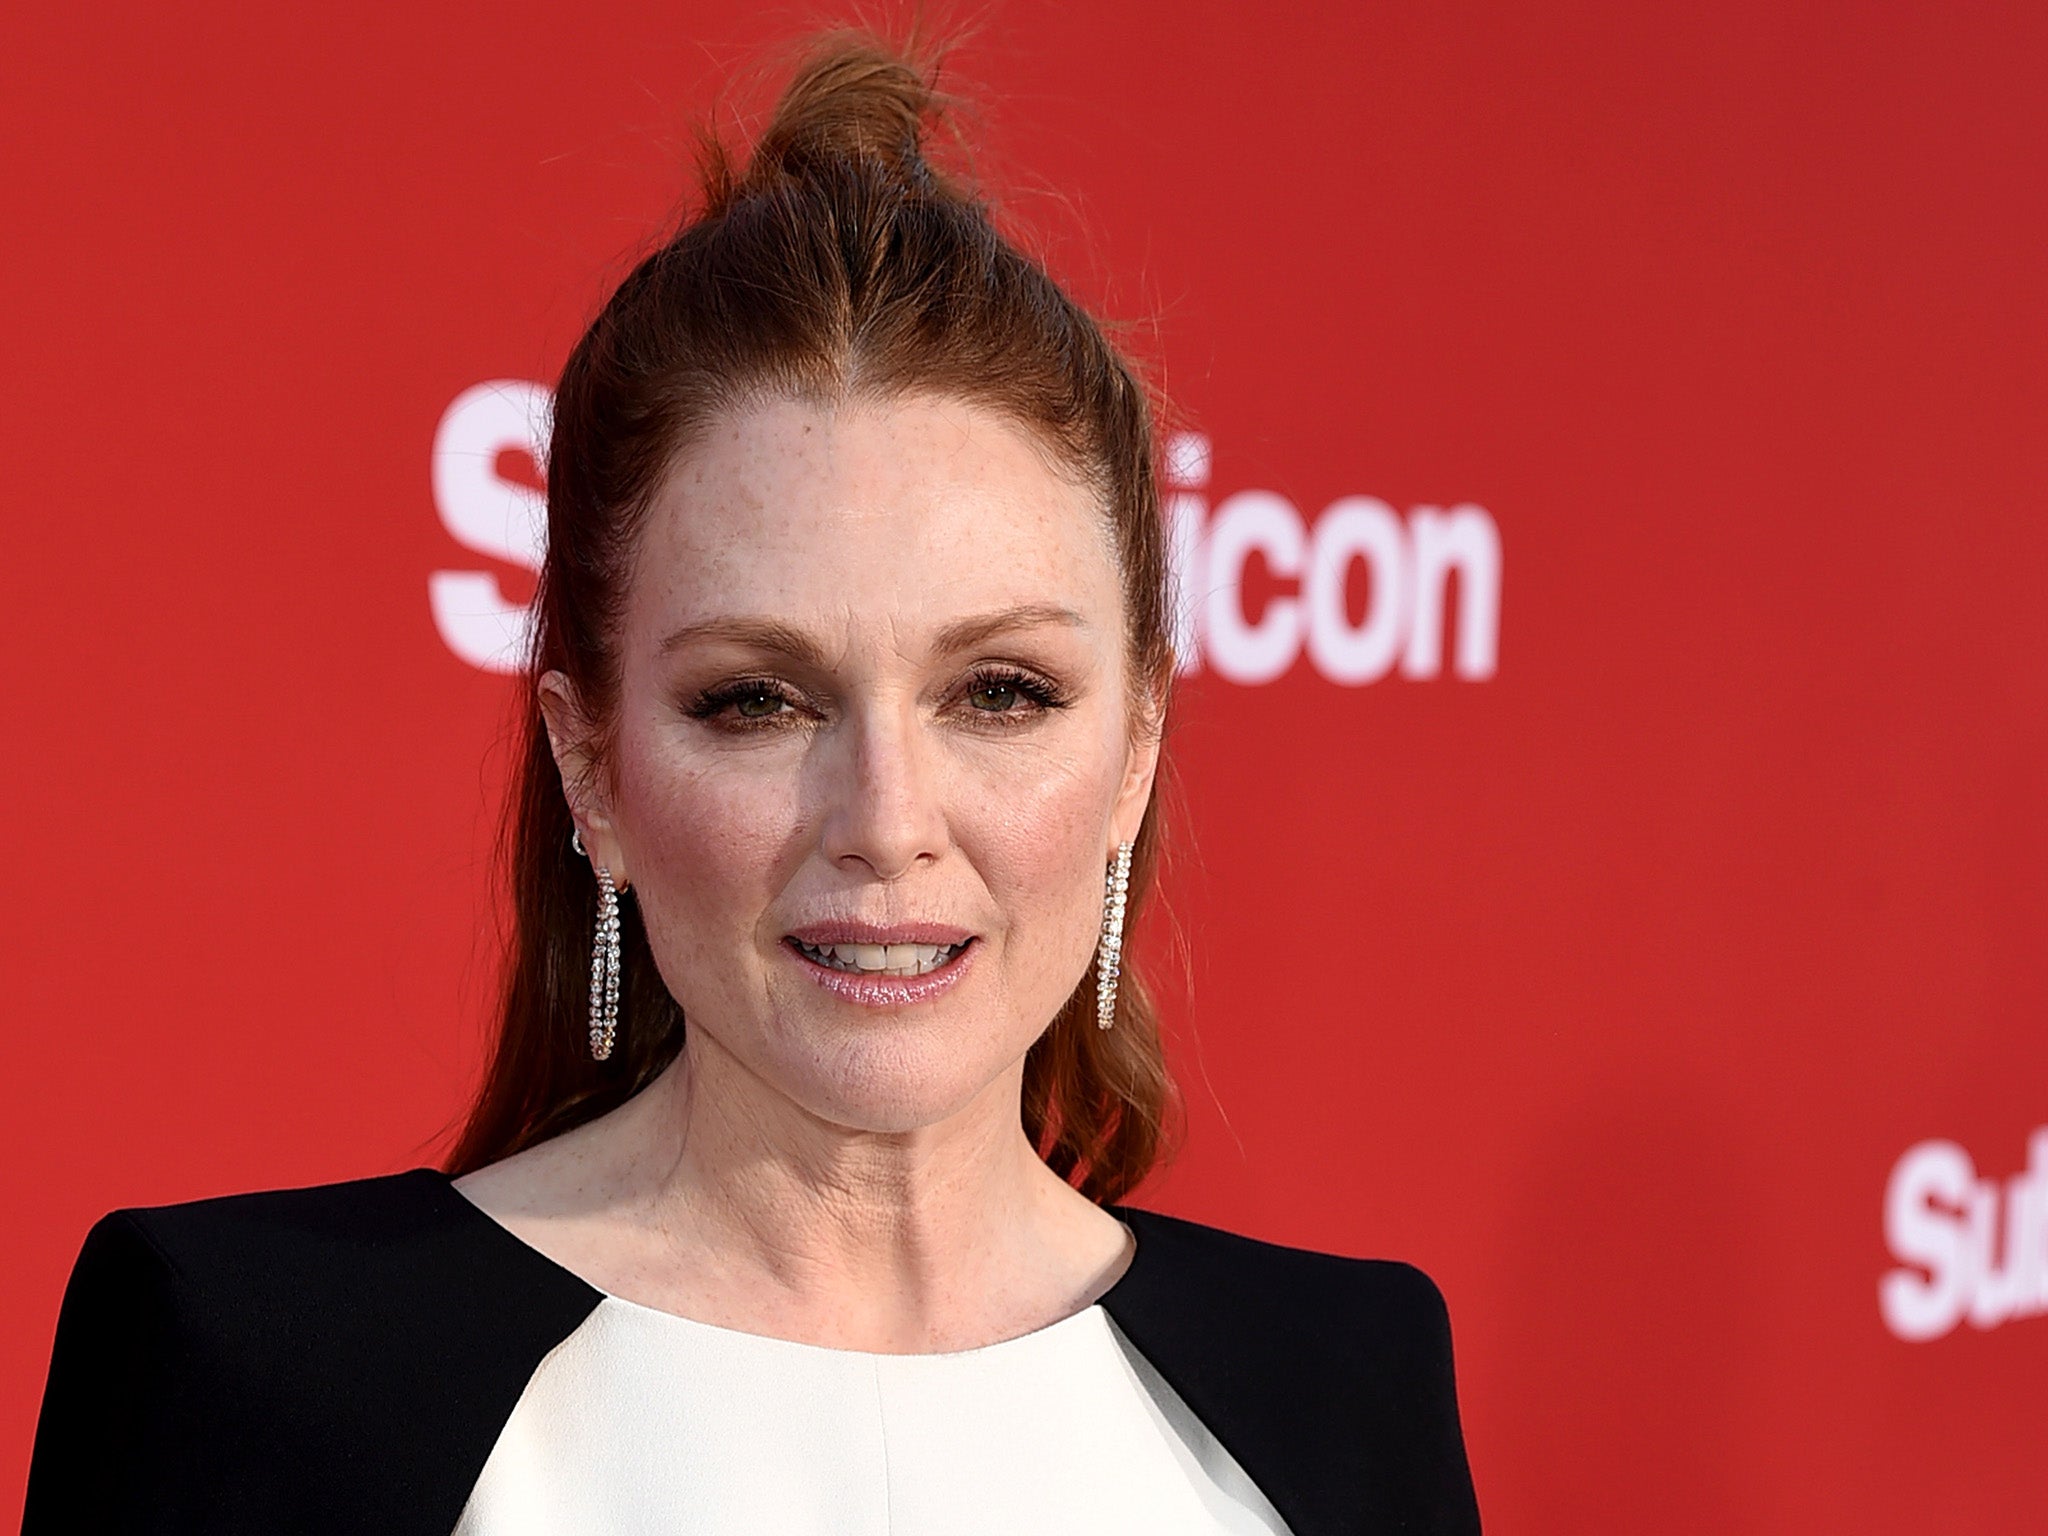 Harvey Weinstein Suburbicon Actress Julianne Moore Says She Hopes Images, Photos, Reviews